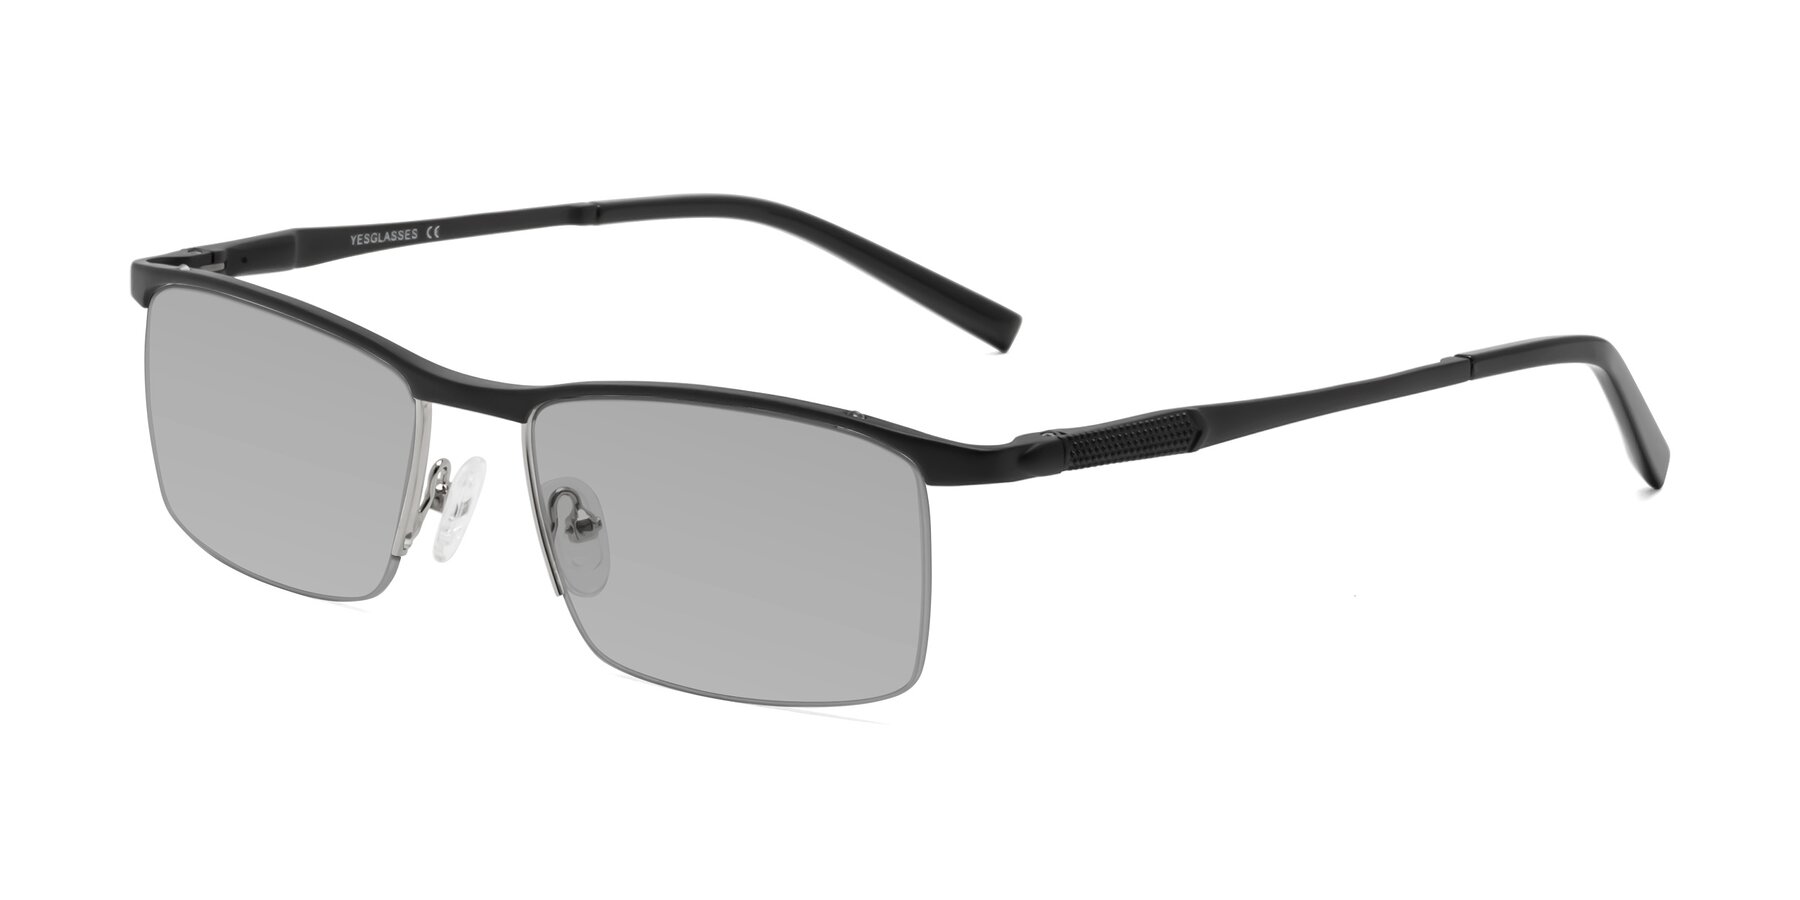 Angle of CX6303 in Black with Light Gray Tinted Lenses